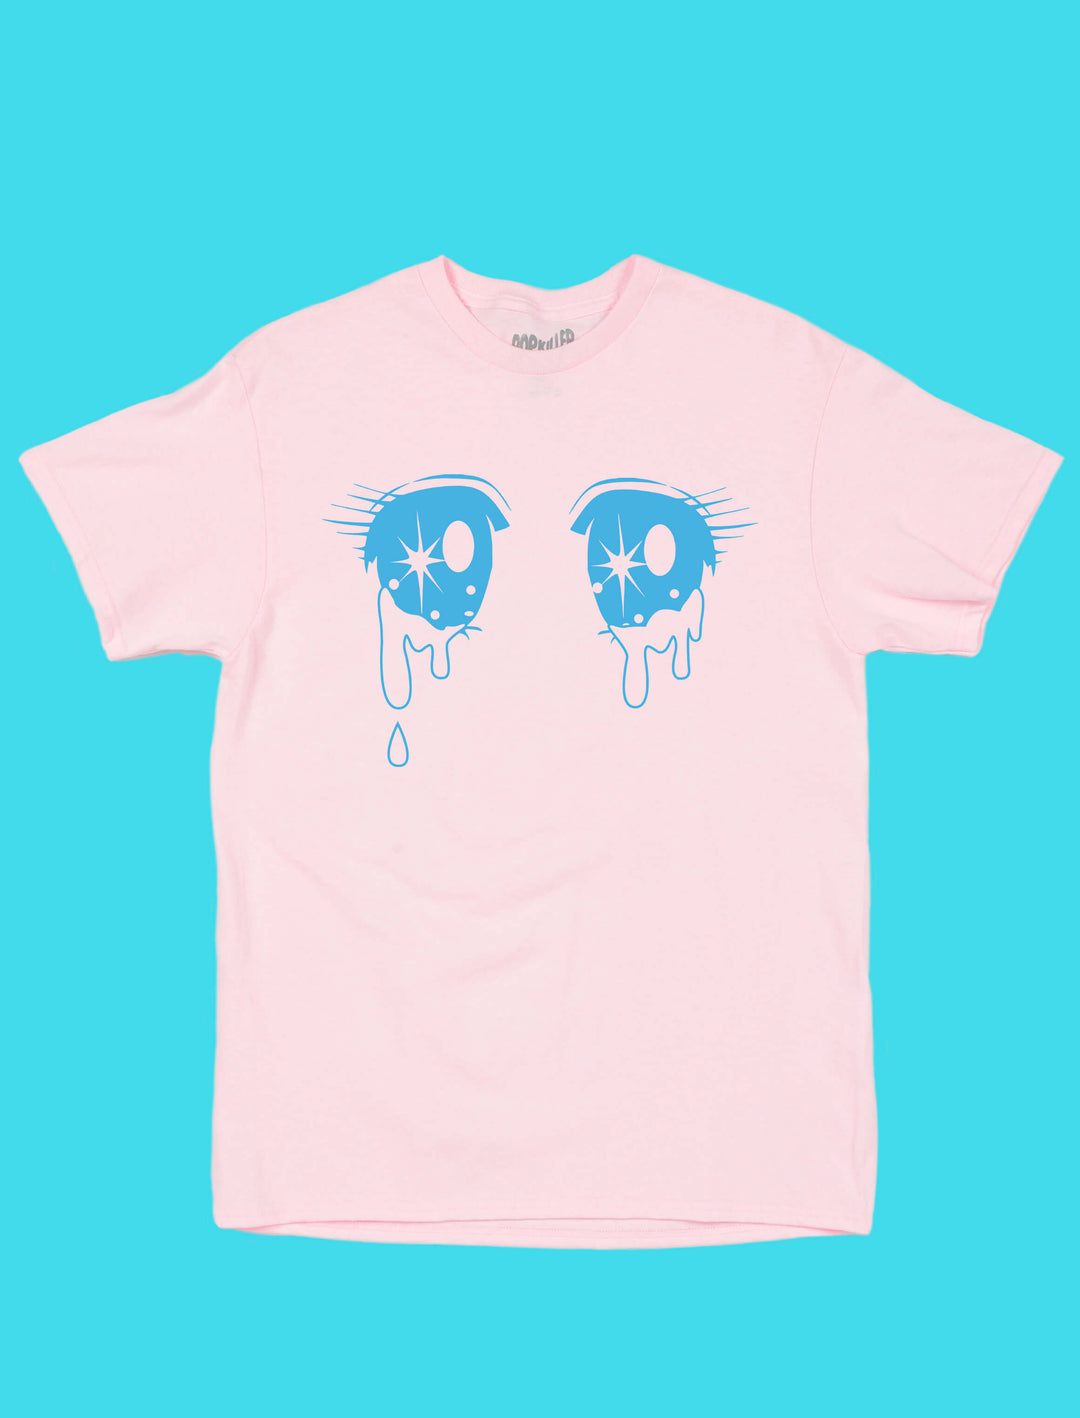 Pink t-shirt with crying shoujo anime eyes on it.